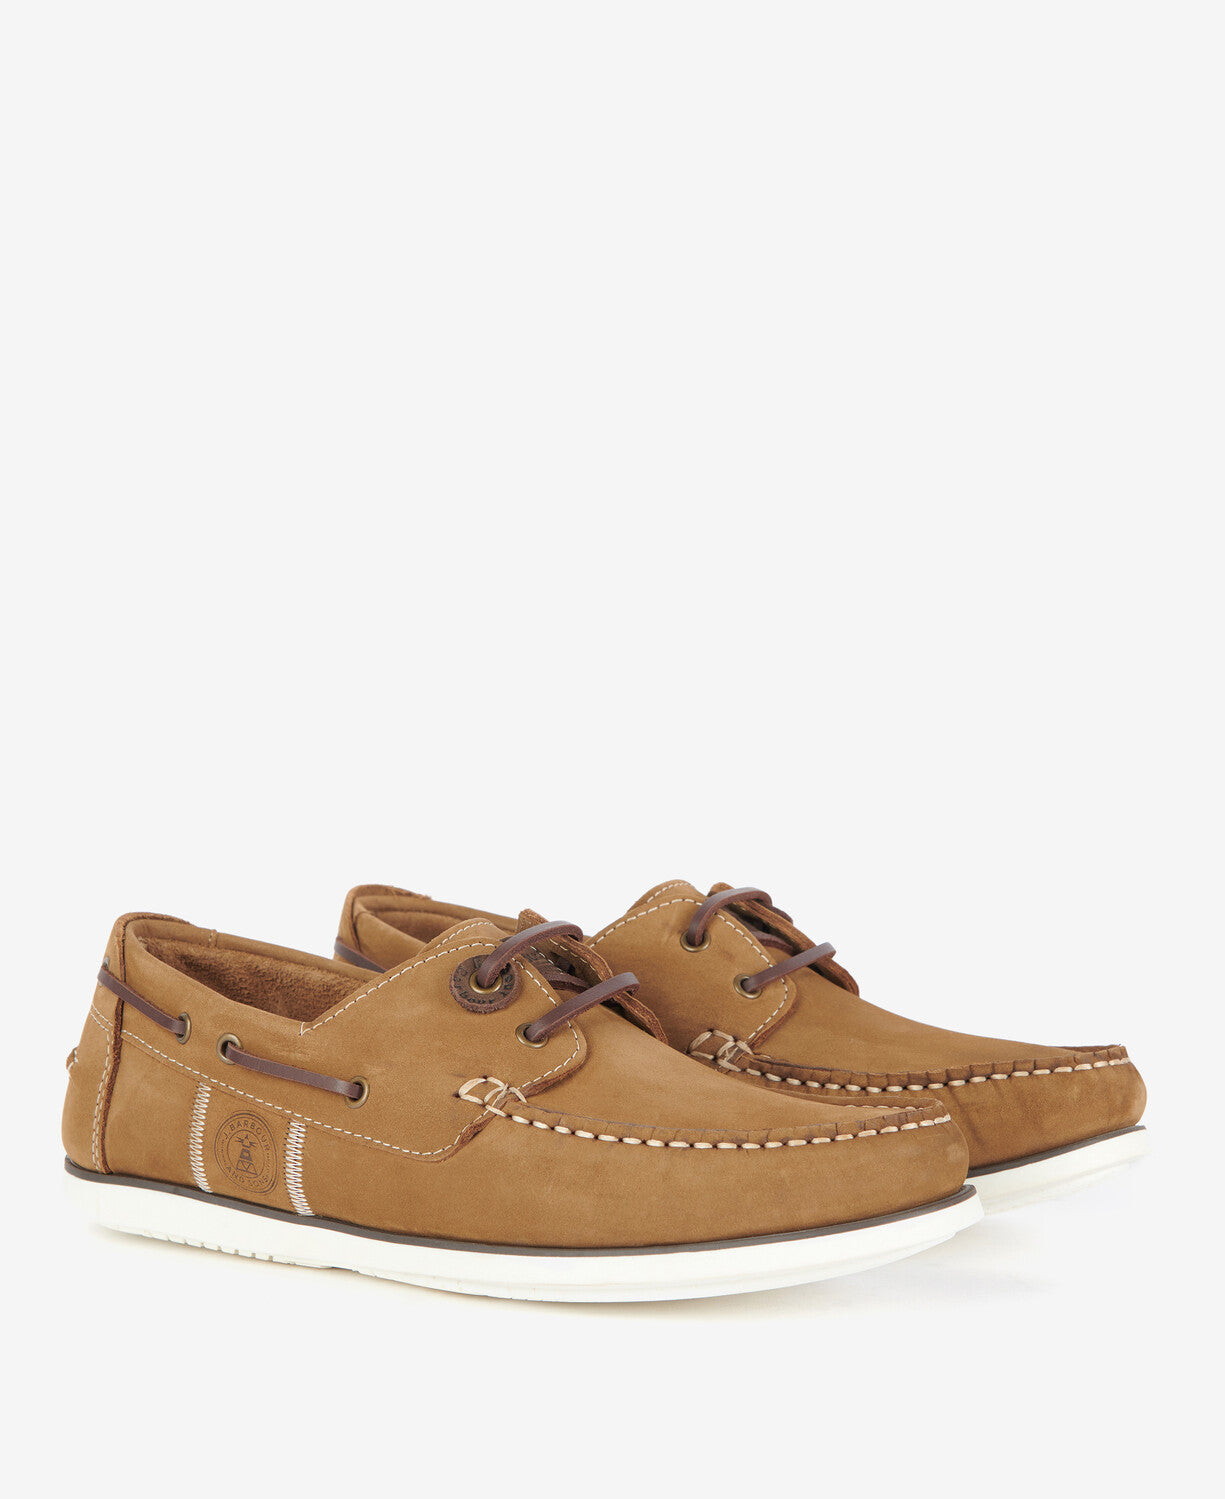 Barbour Wake Boat Shoes